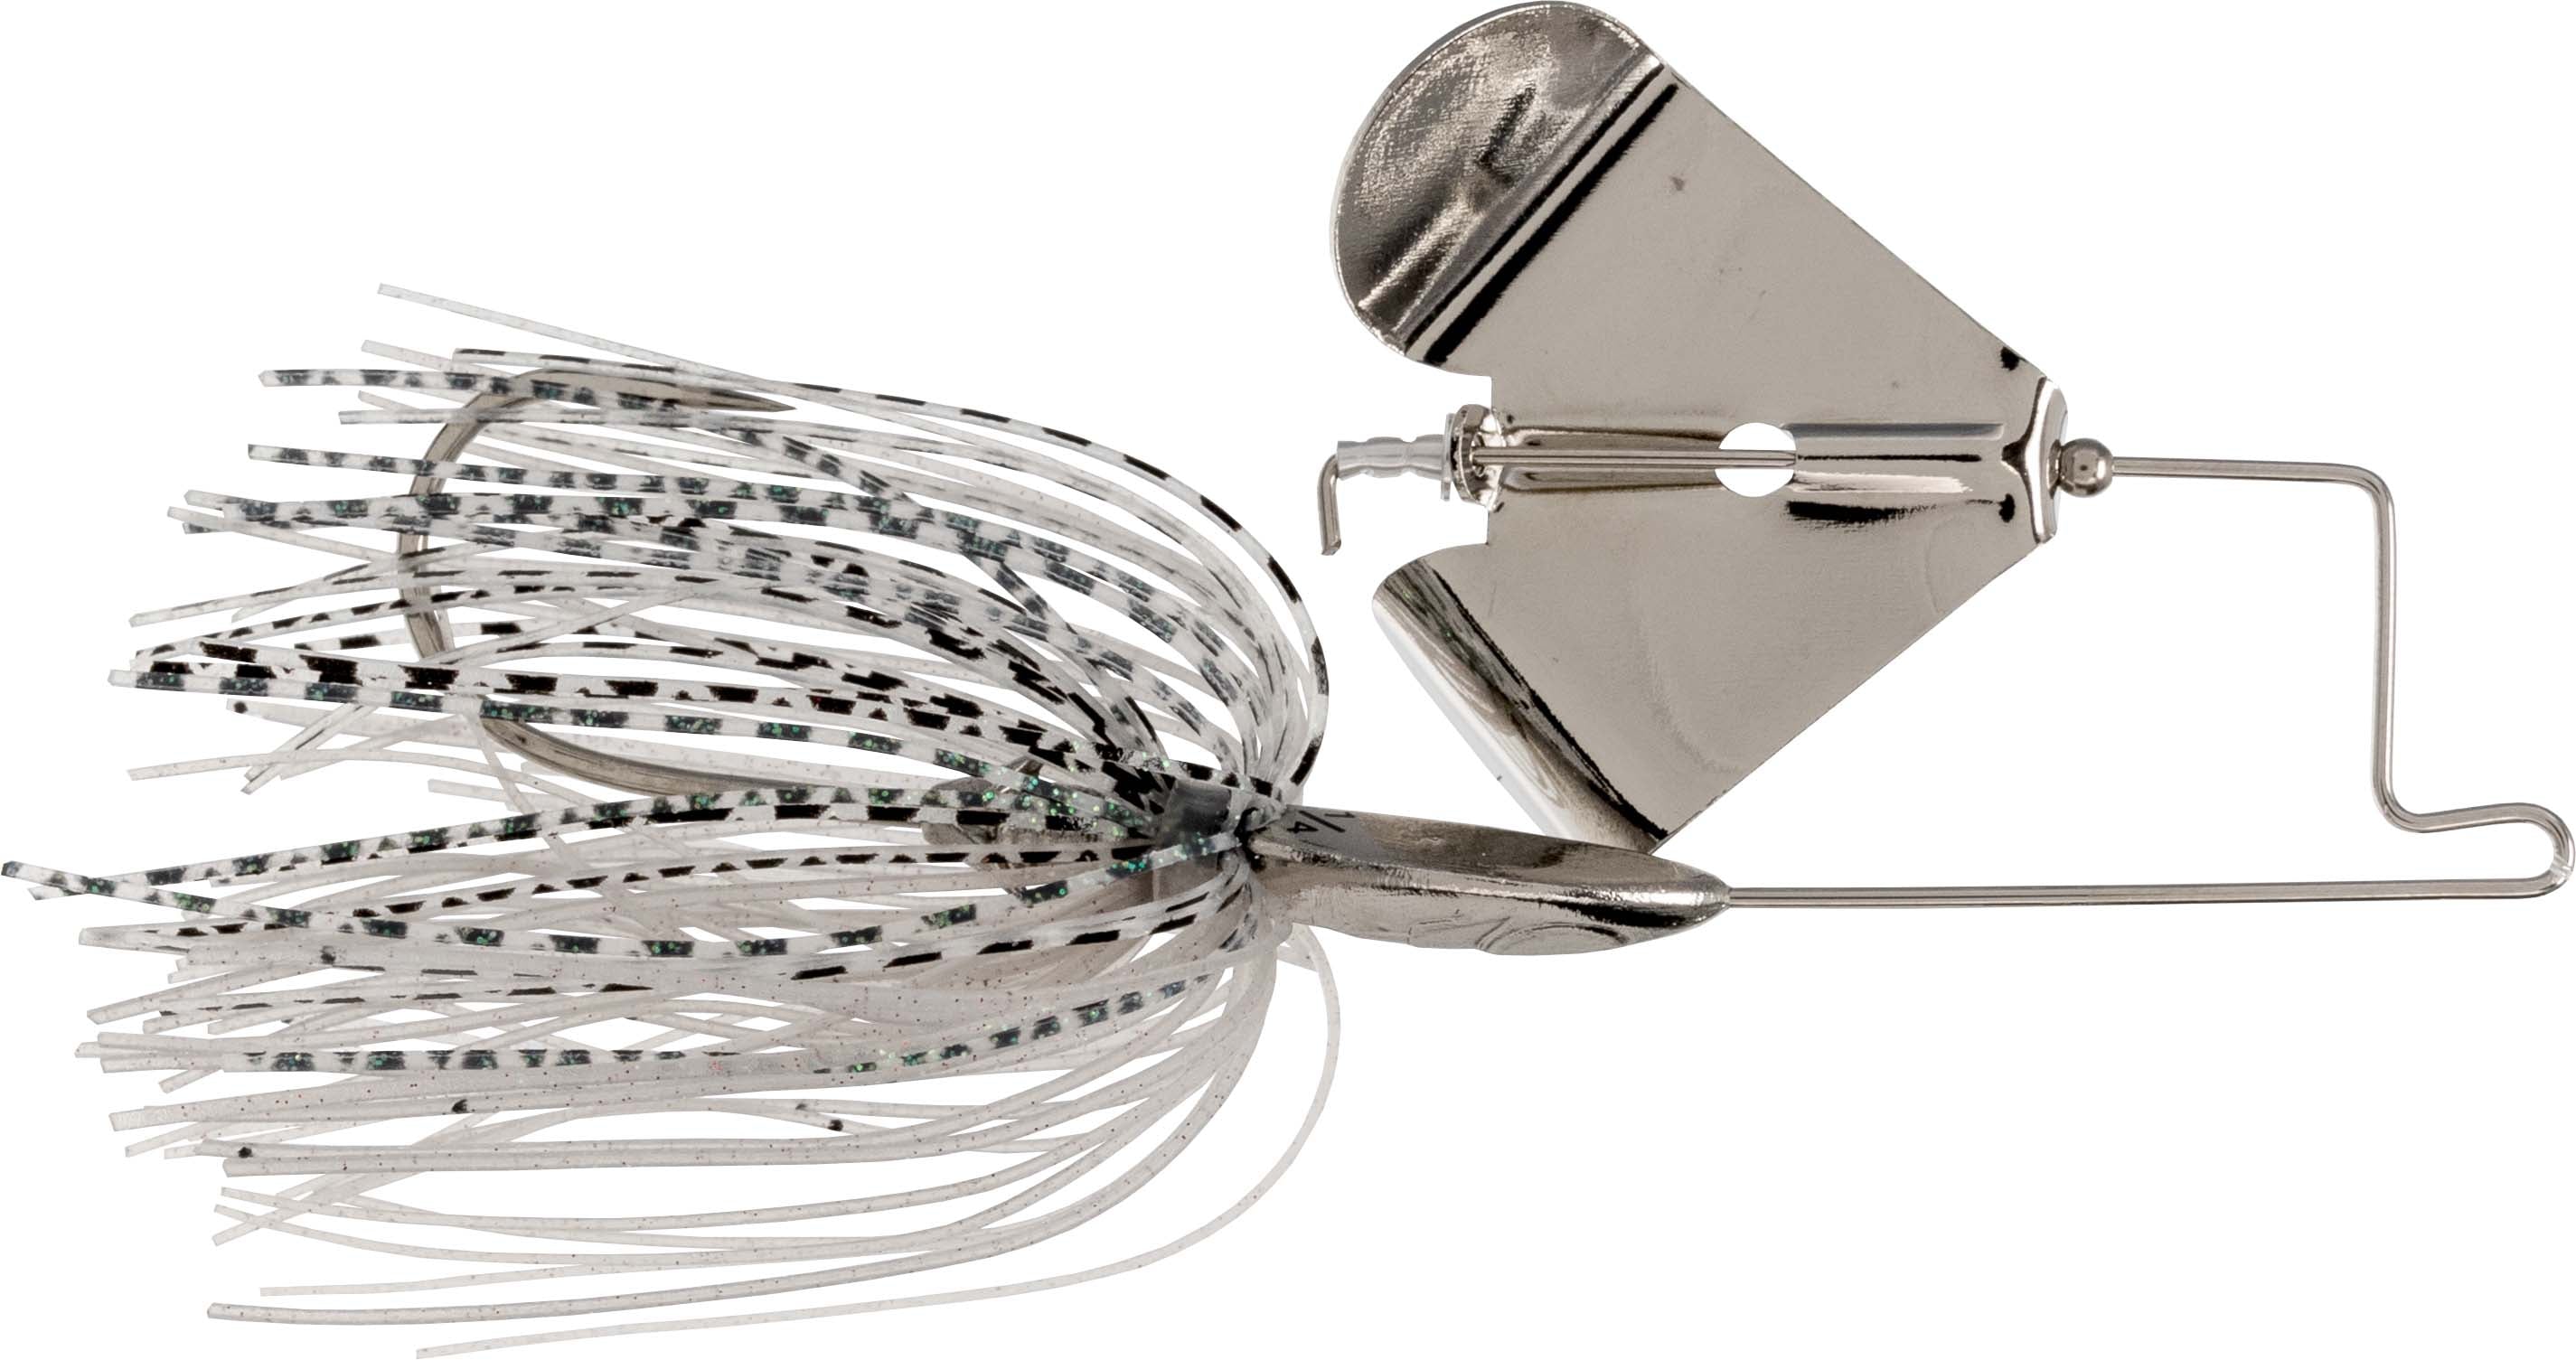 Buckeye Lures Spot Remover Ned Rig Jig Head - 3 Pack